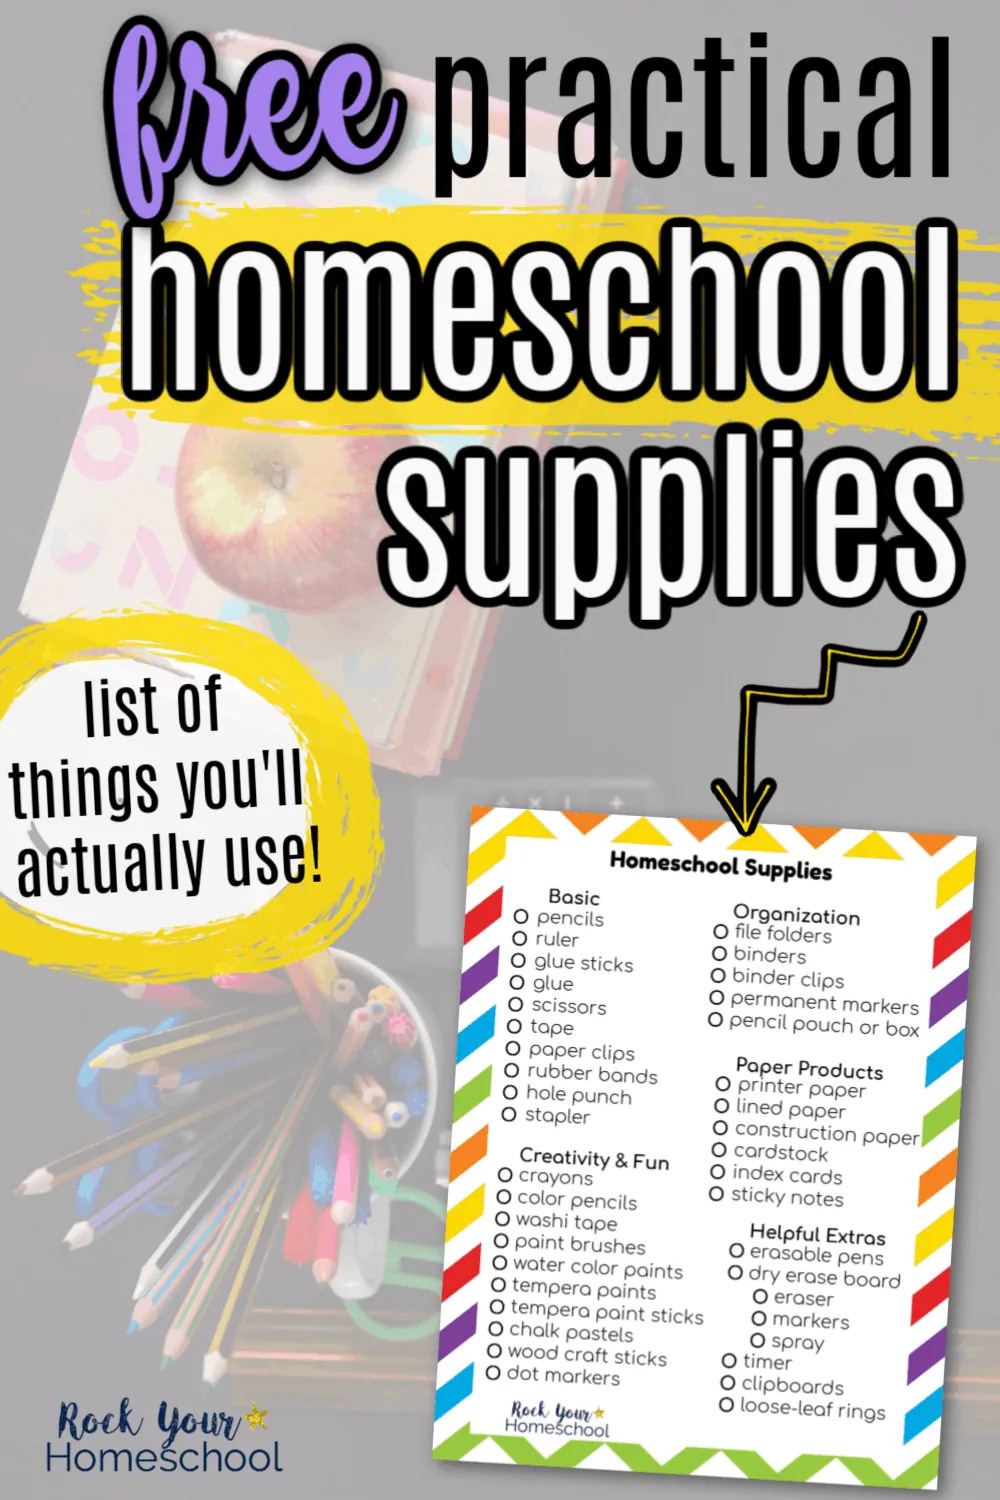 Free Homeschool Supplies List to Help You Make The Most of Your Day